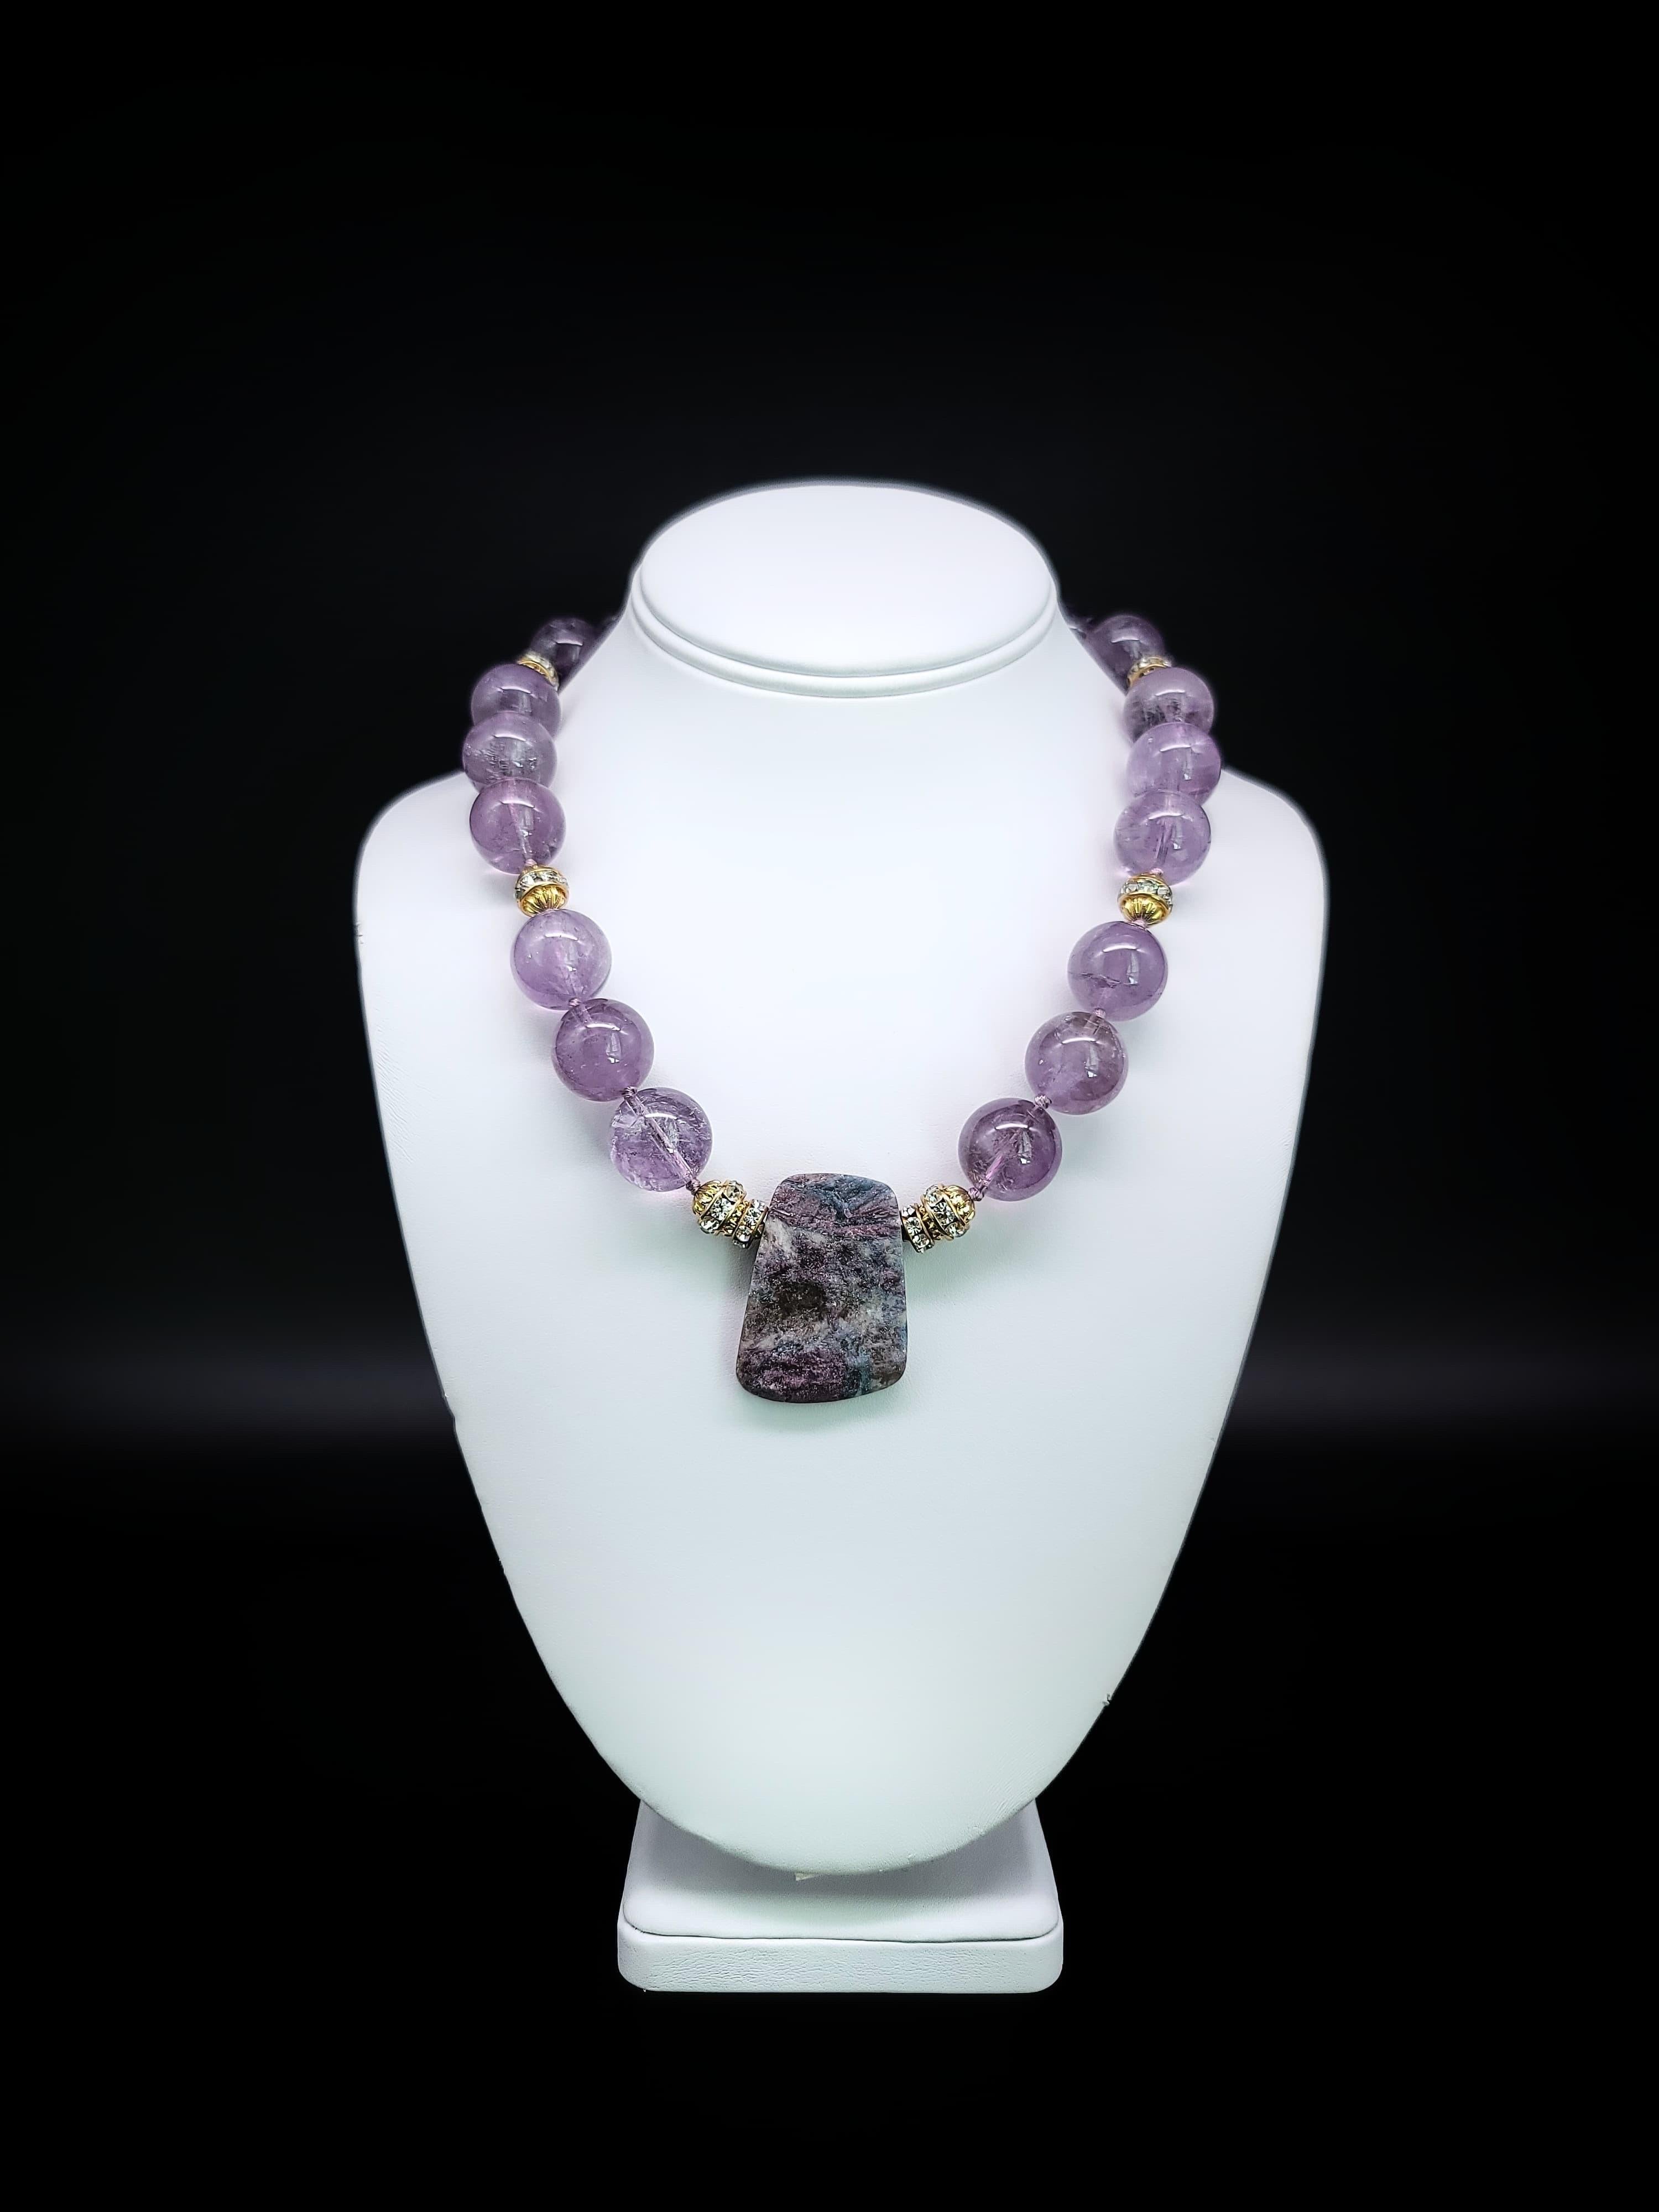 One-of-a-Kind

Paraiba Tourmaline presented in a two-sided rough-cut and polished plate serves as the centerpiece of this necklace strung of 20 mm. violet amethyst beads. 
Paraiba stone first discovered in Brazil in the 1980s is a highly valued, and